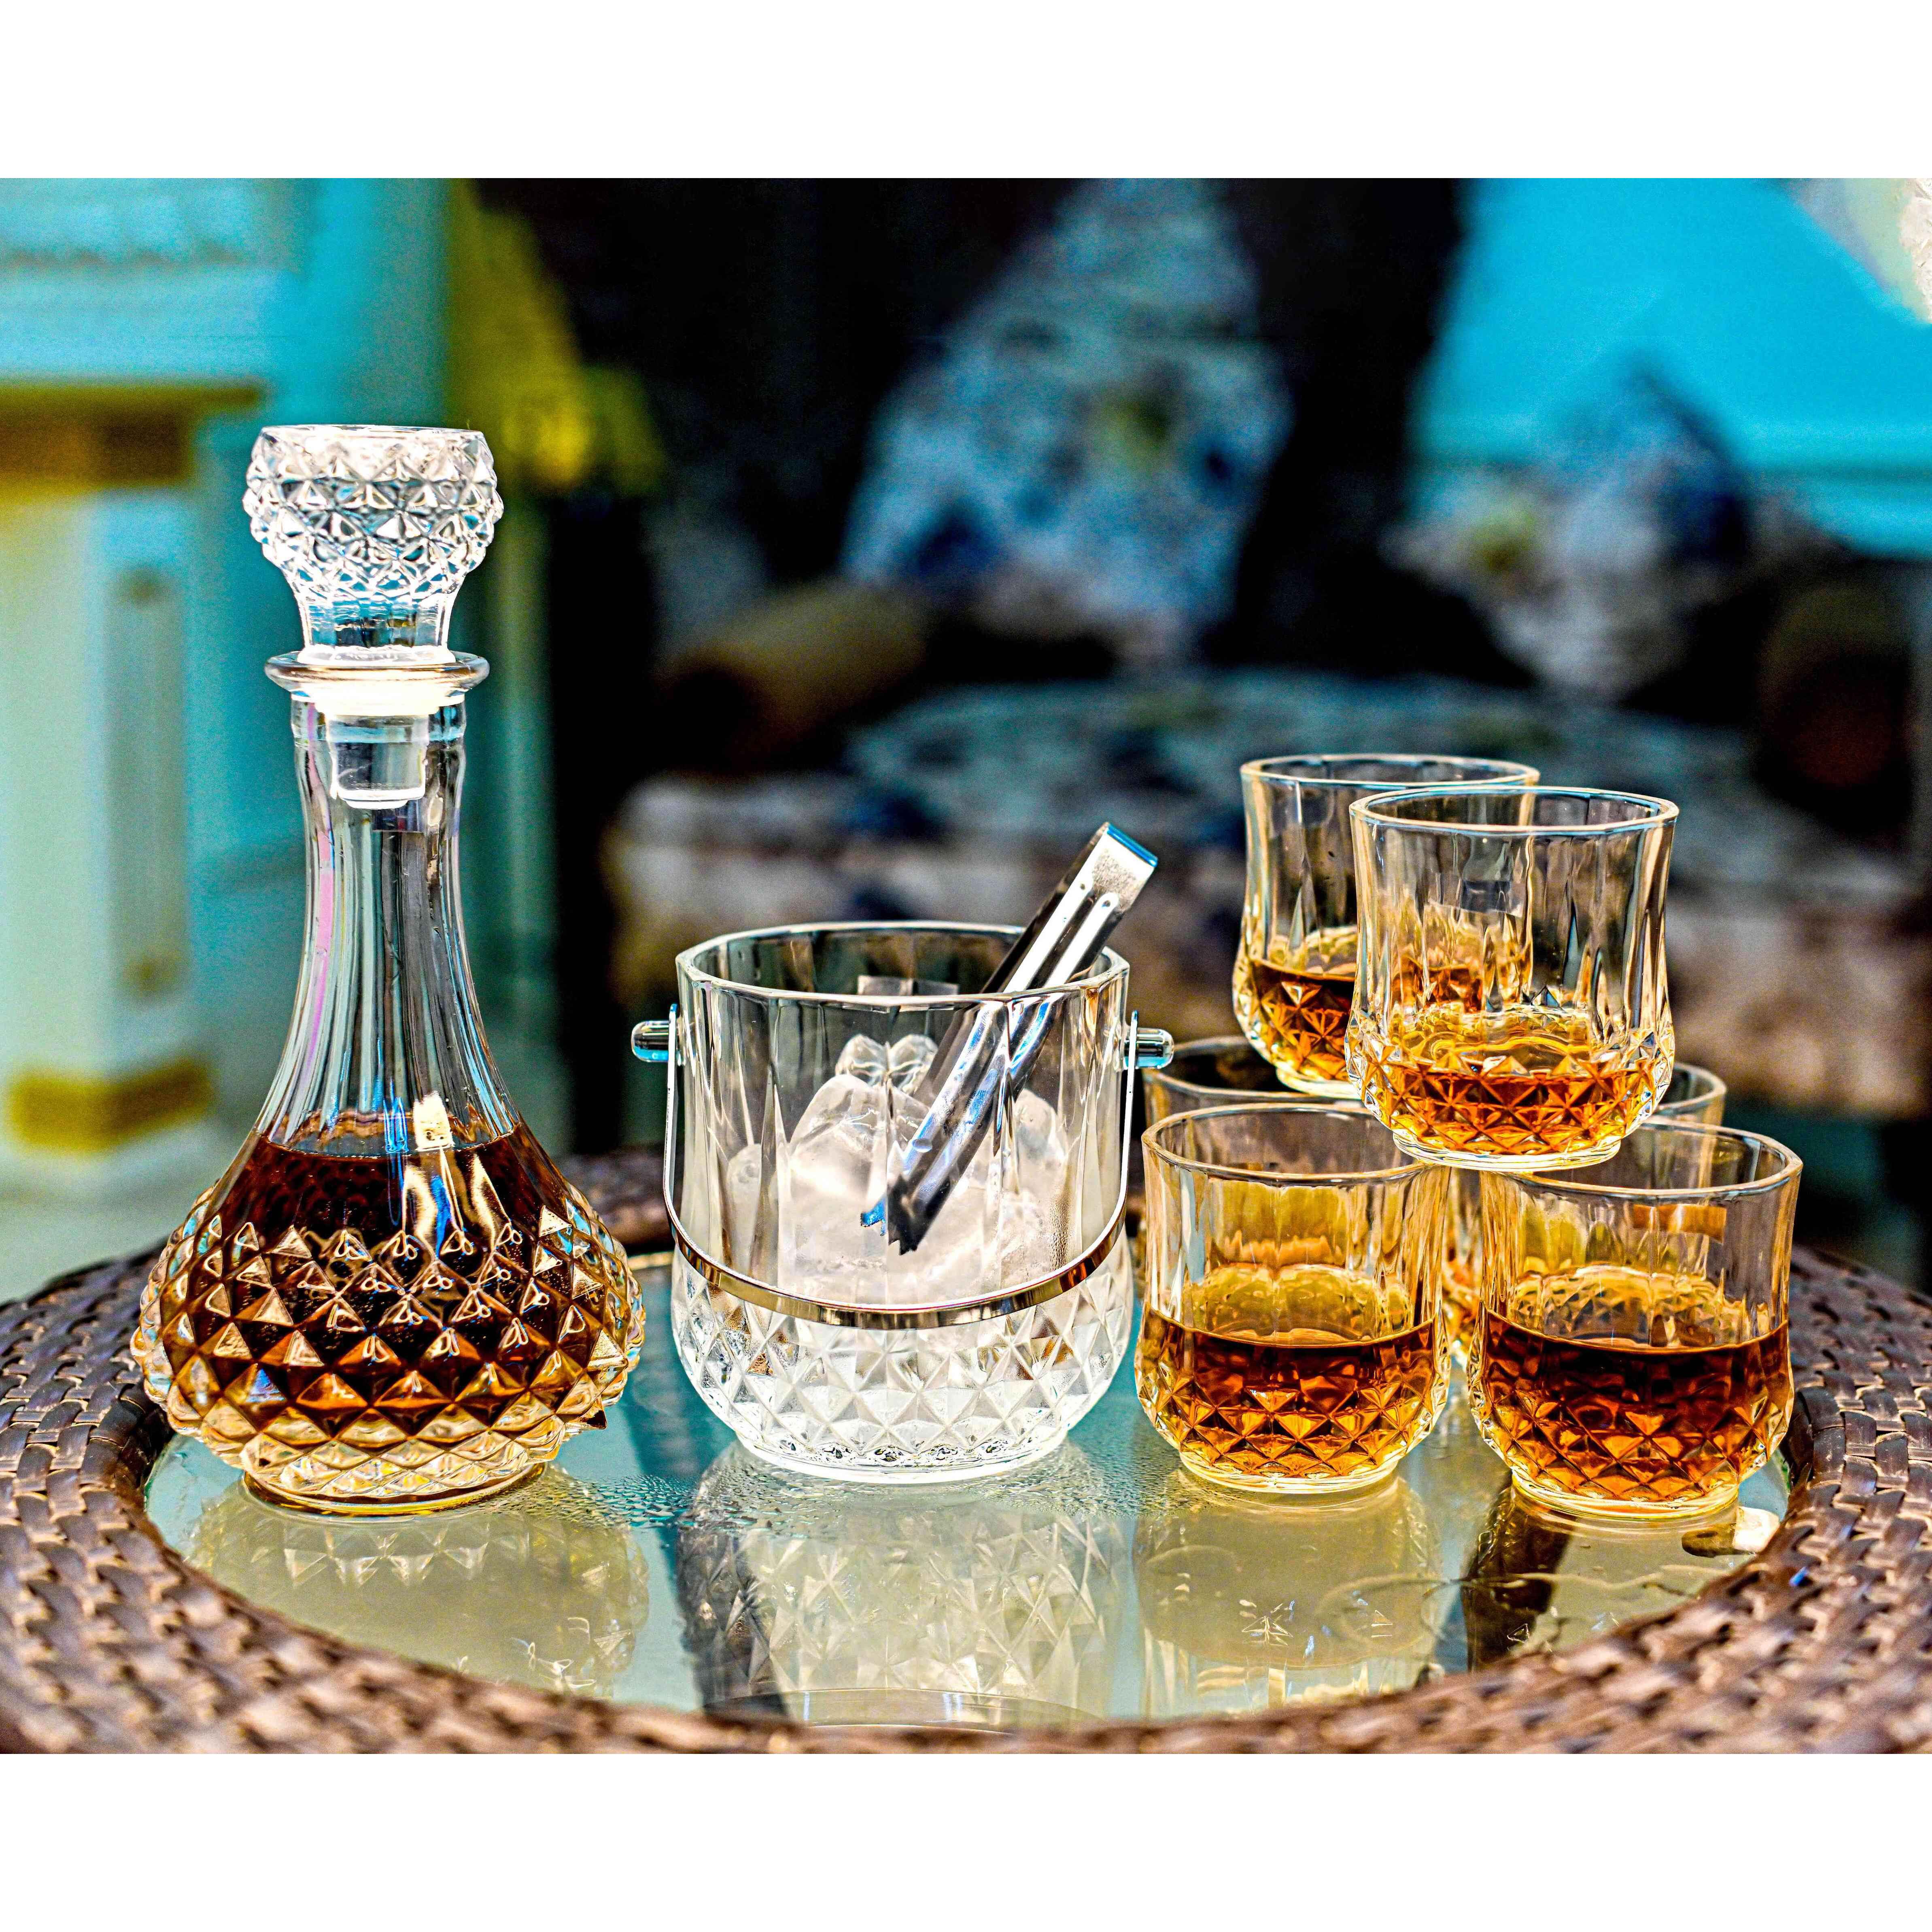 Iris Crystal Decanter Set With Glasses